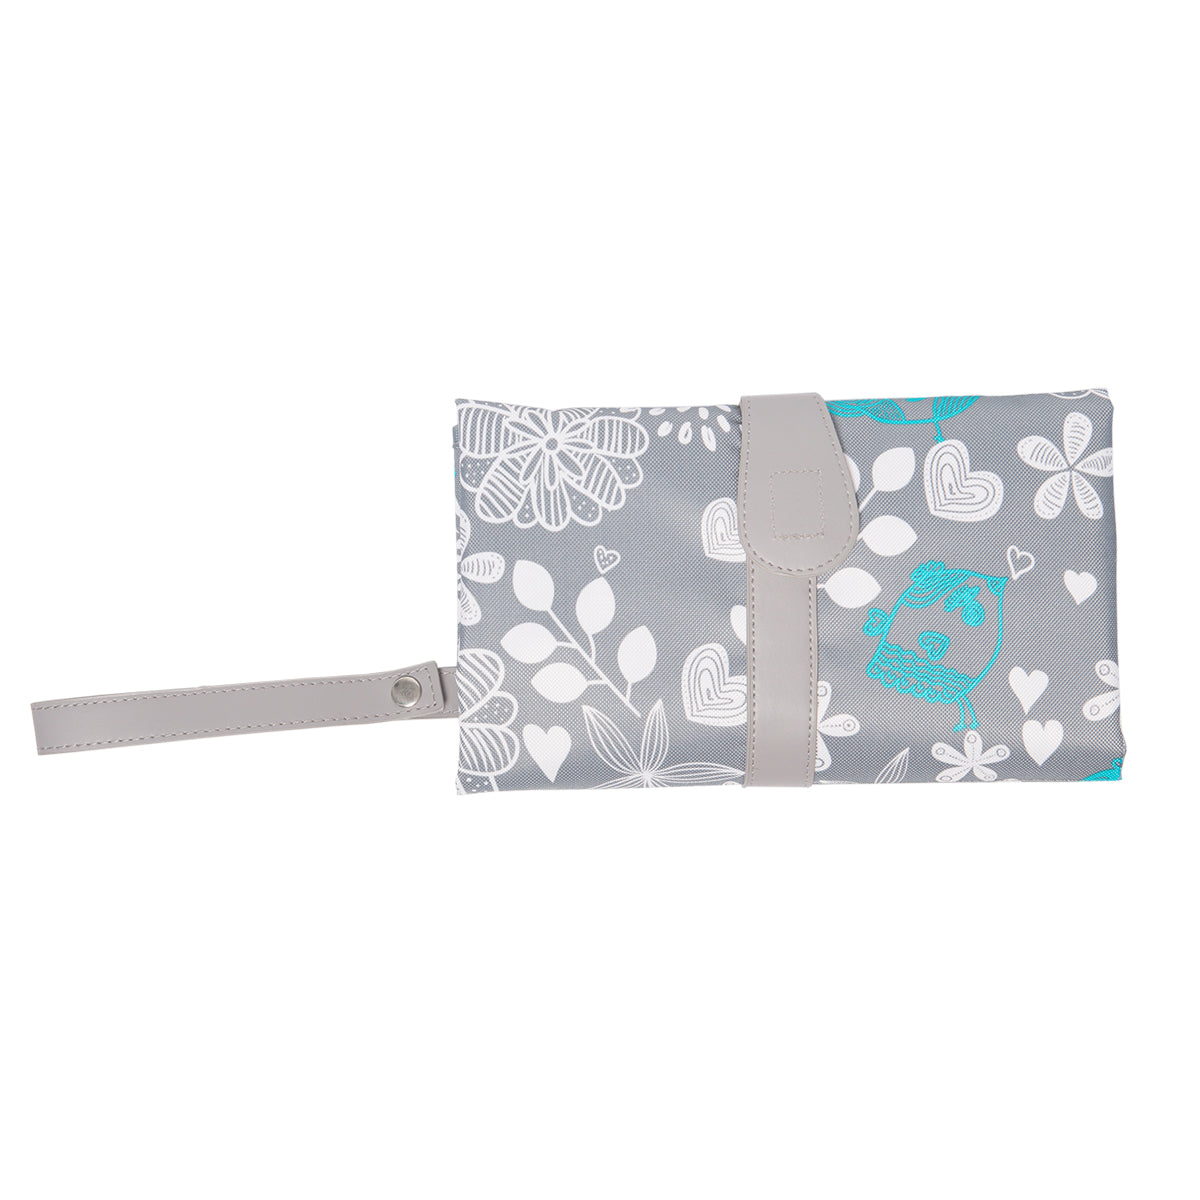 Snuggletime Travel Nappy Changing Clutch